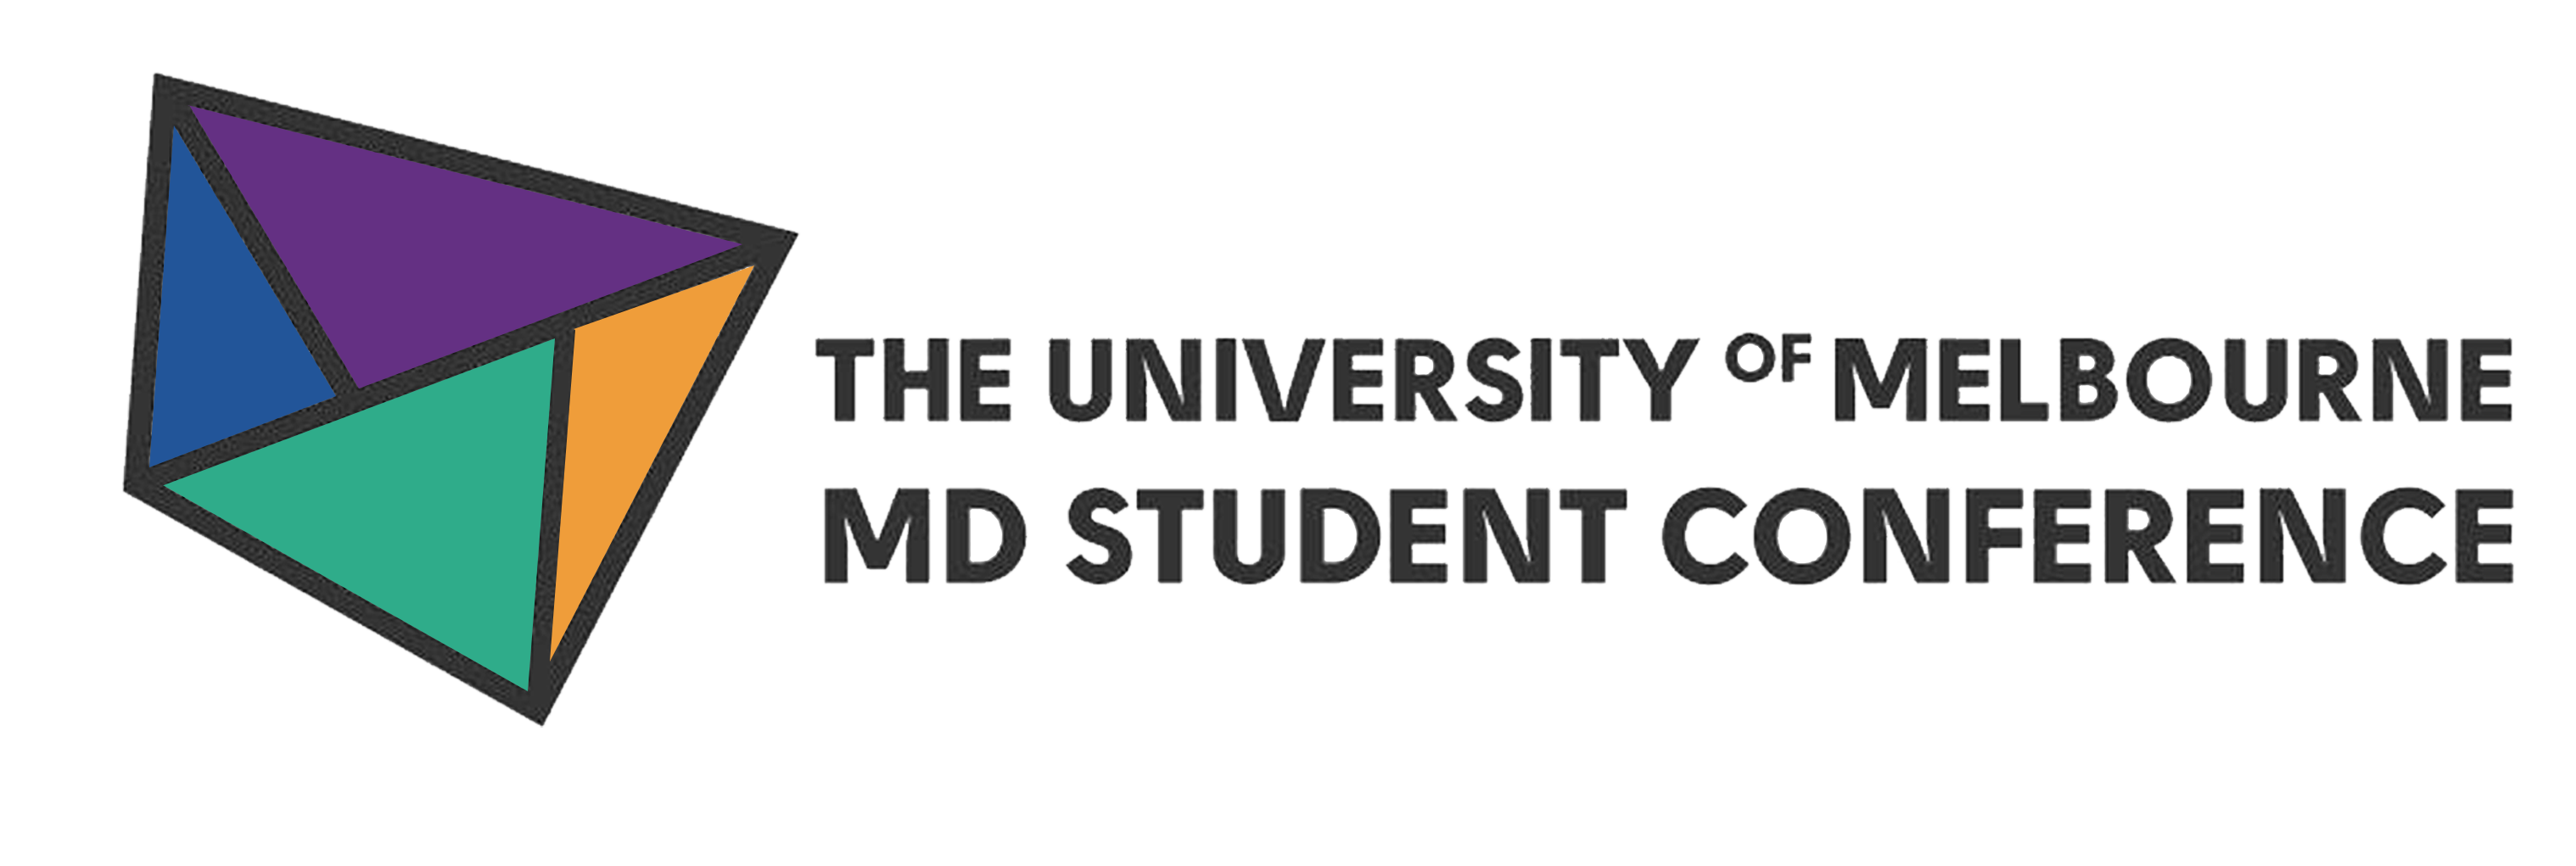 MDSC2019 | The University of Melbourne MD Student Conference 2019